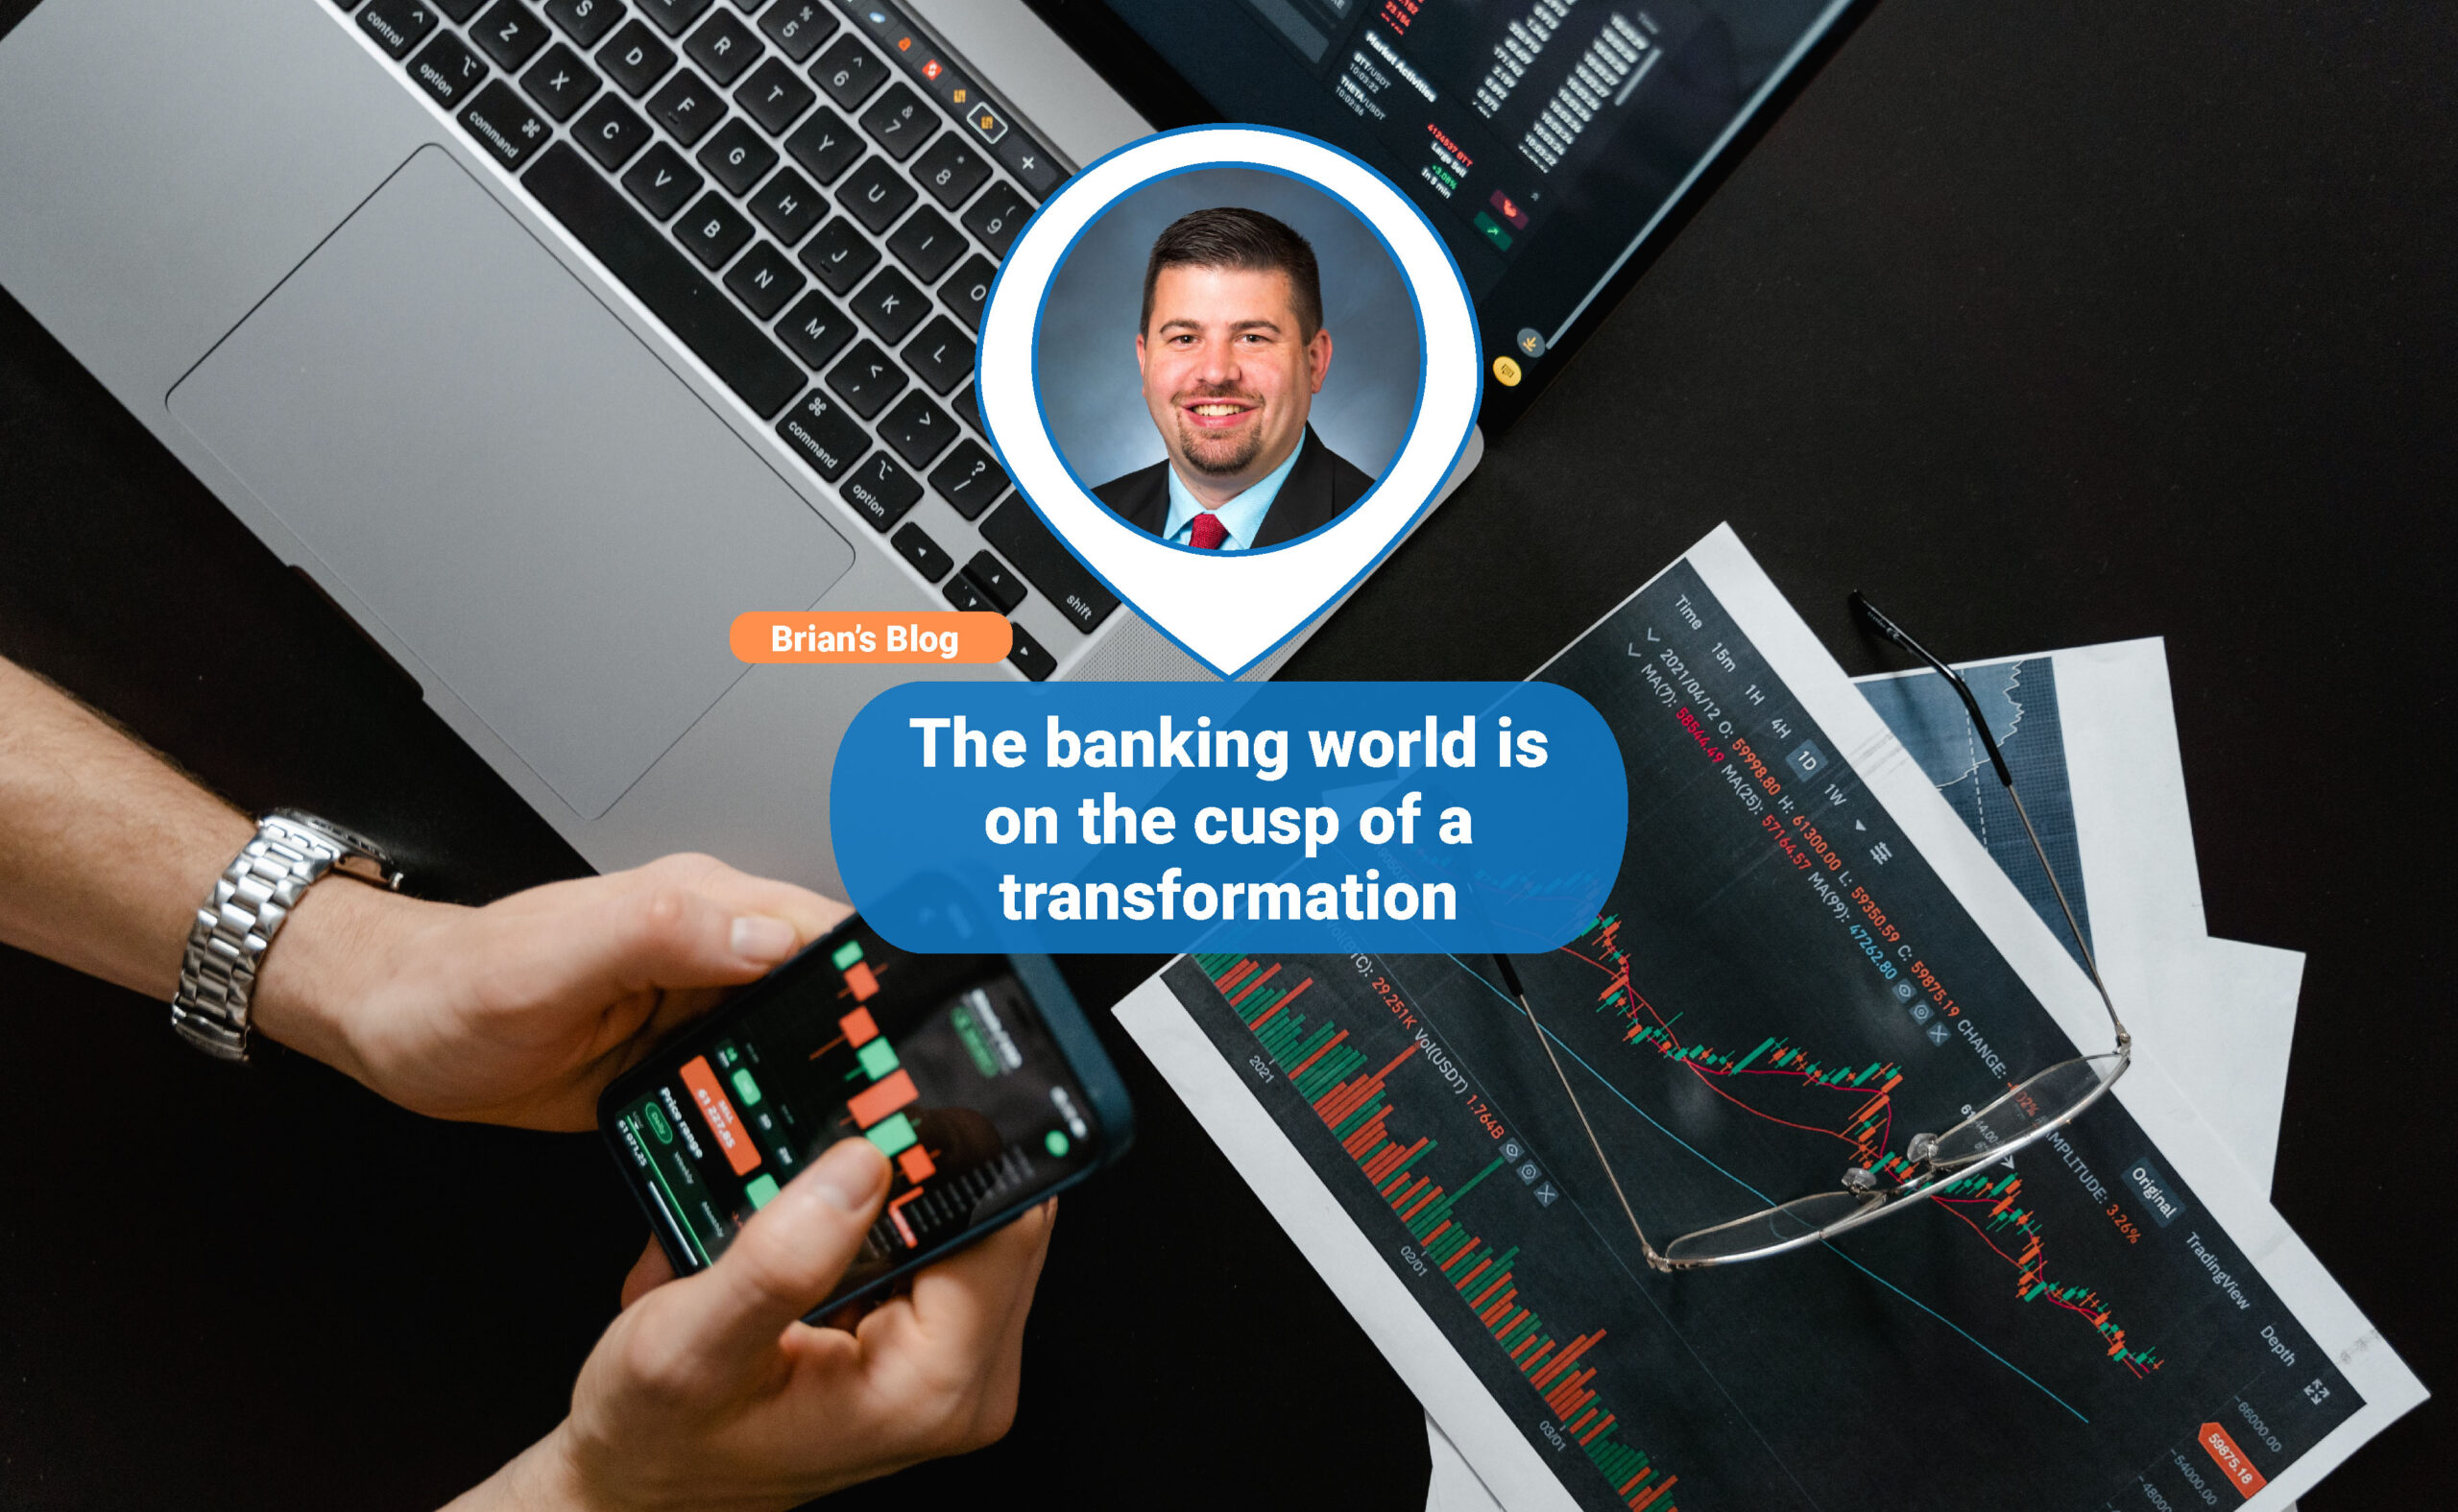 The banking world is on the cusp of a transformation.